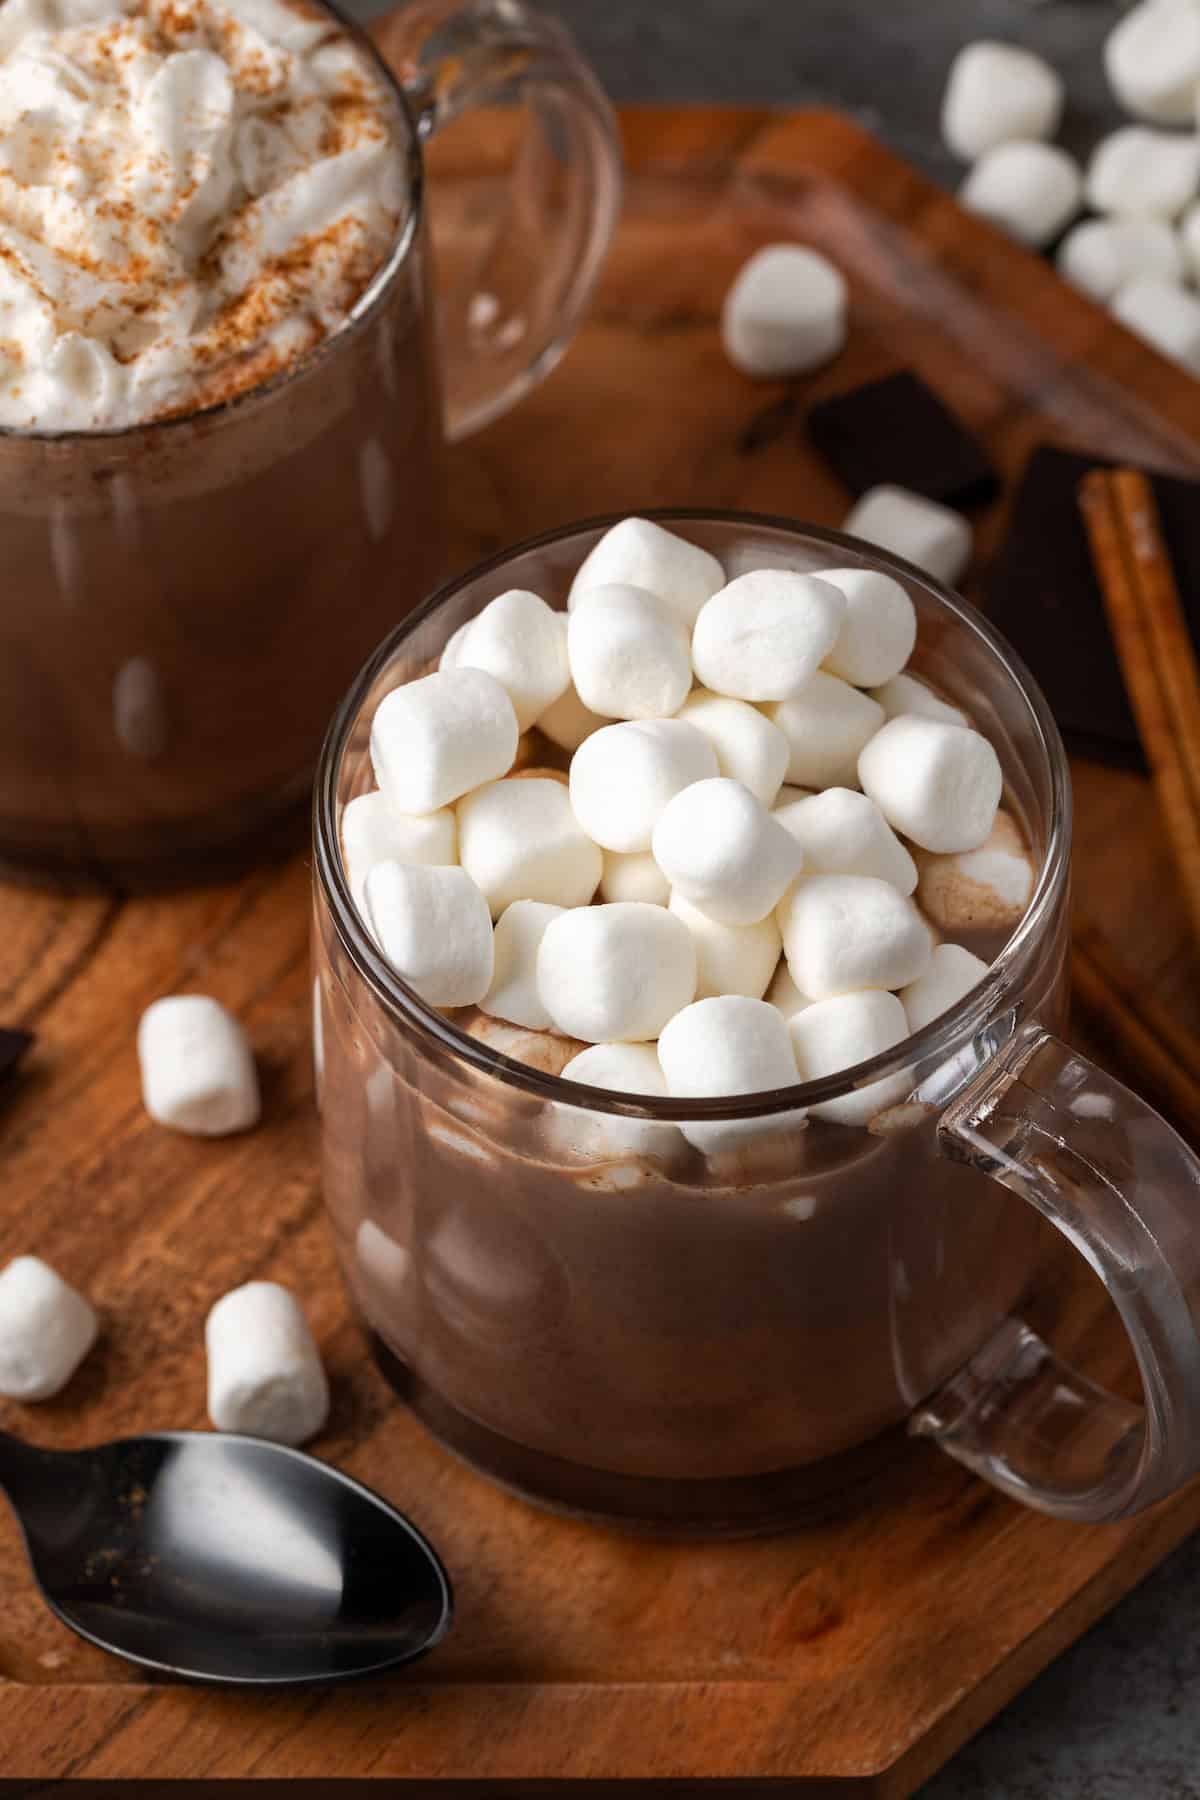 A mug of pumpkin spice hot chocolate topped with marshmallows next to a second mug garnished with whipped cream and cinnamon.